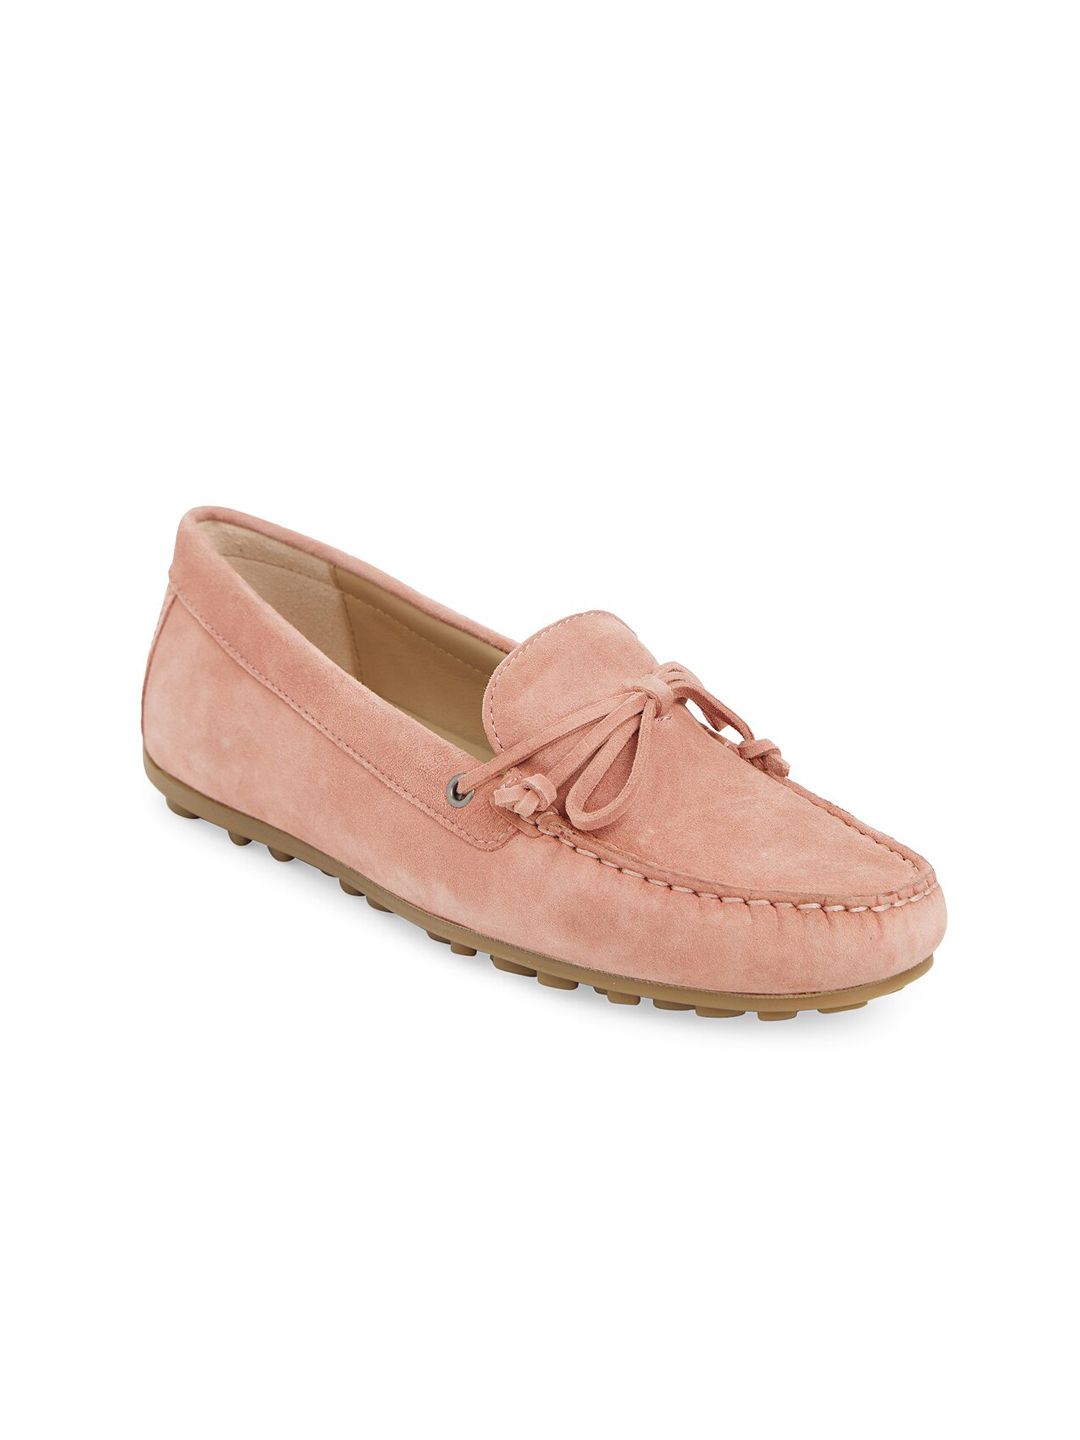 ECCO Women Pink Leather Contemporary Walking Non-Marking Shoes Price in India